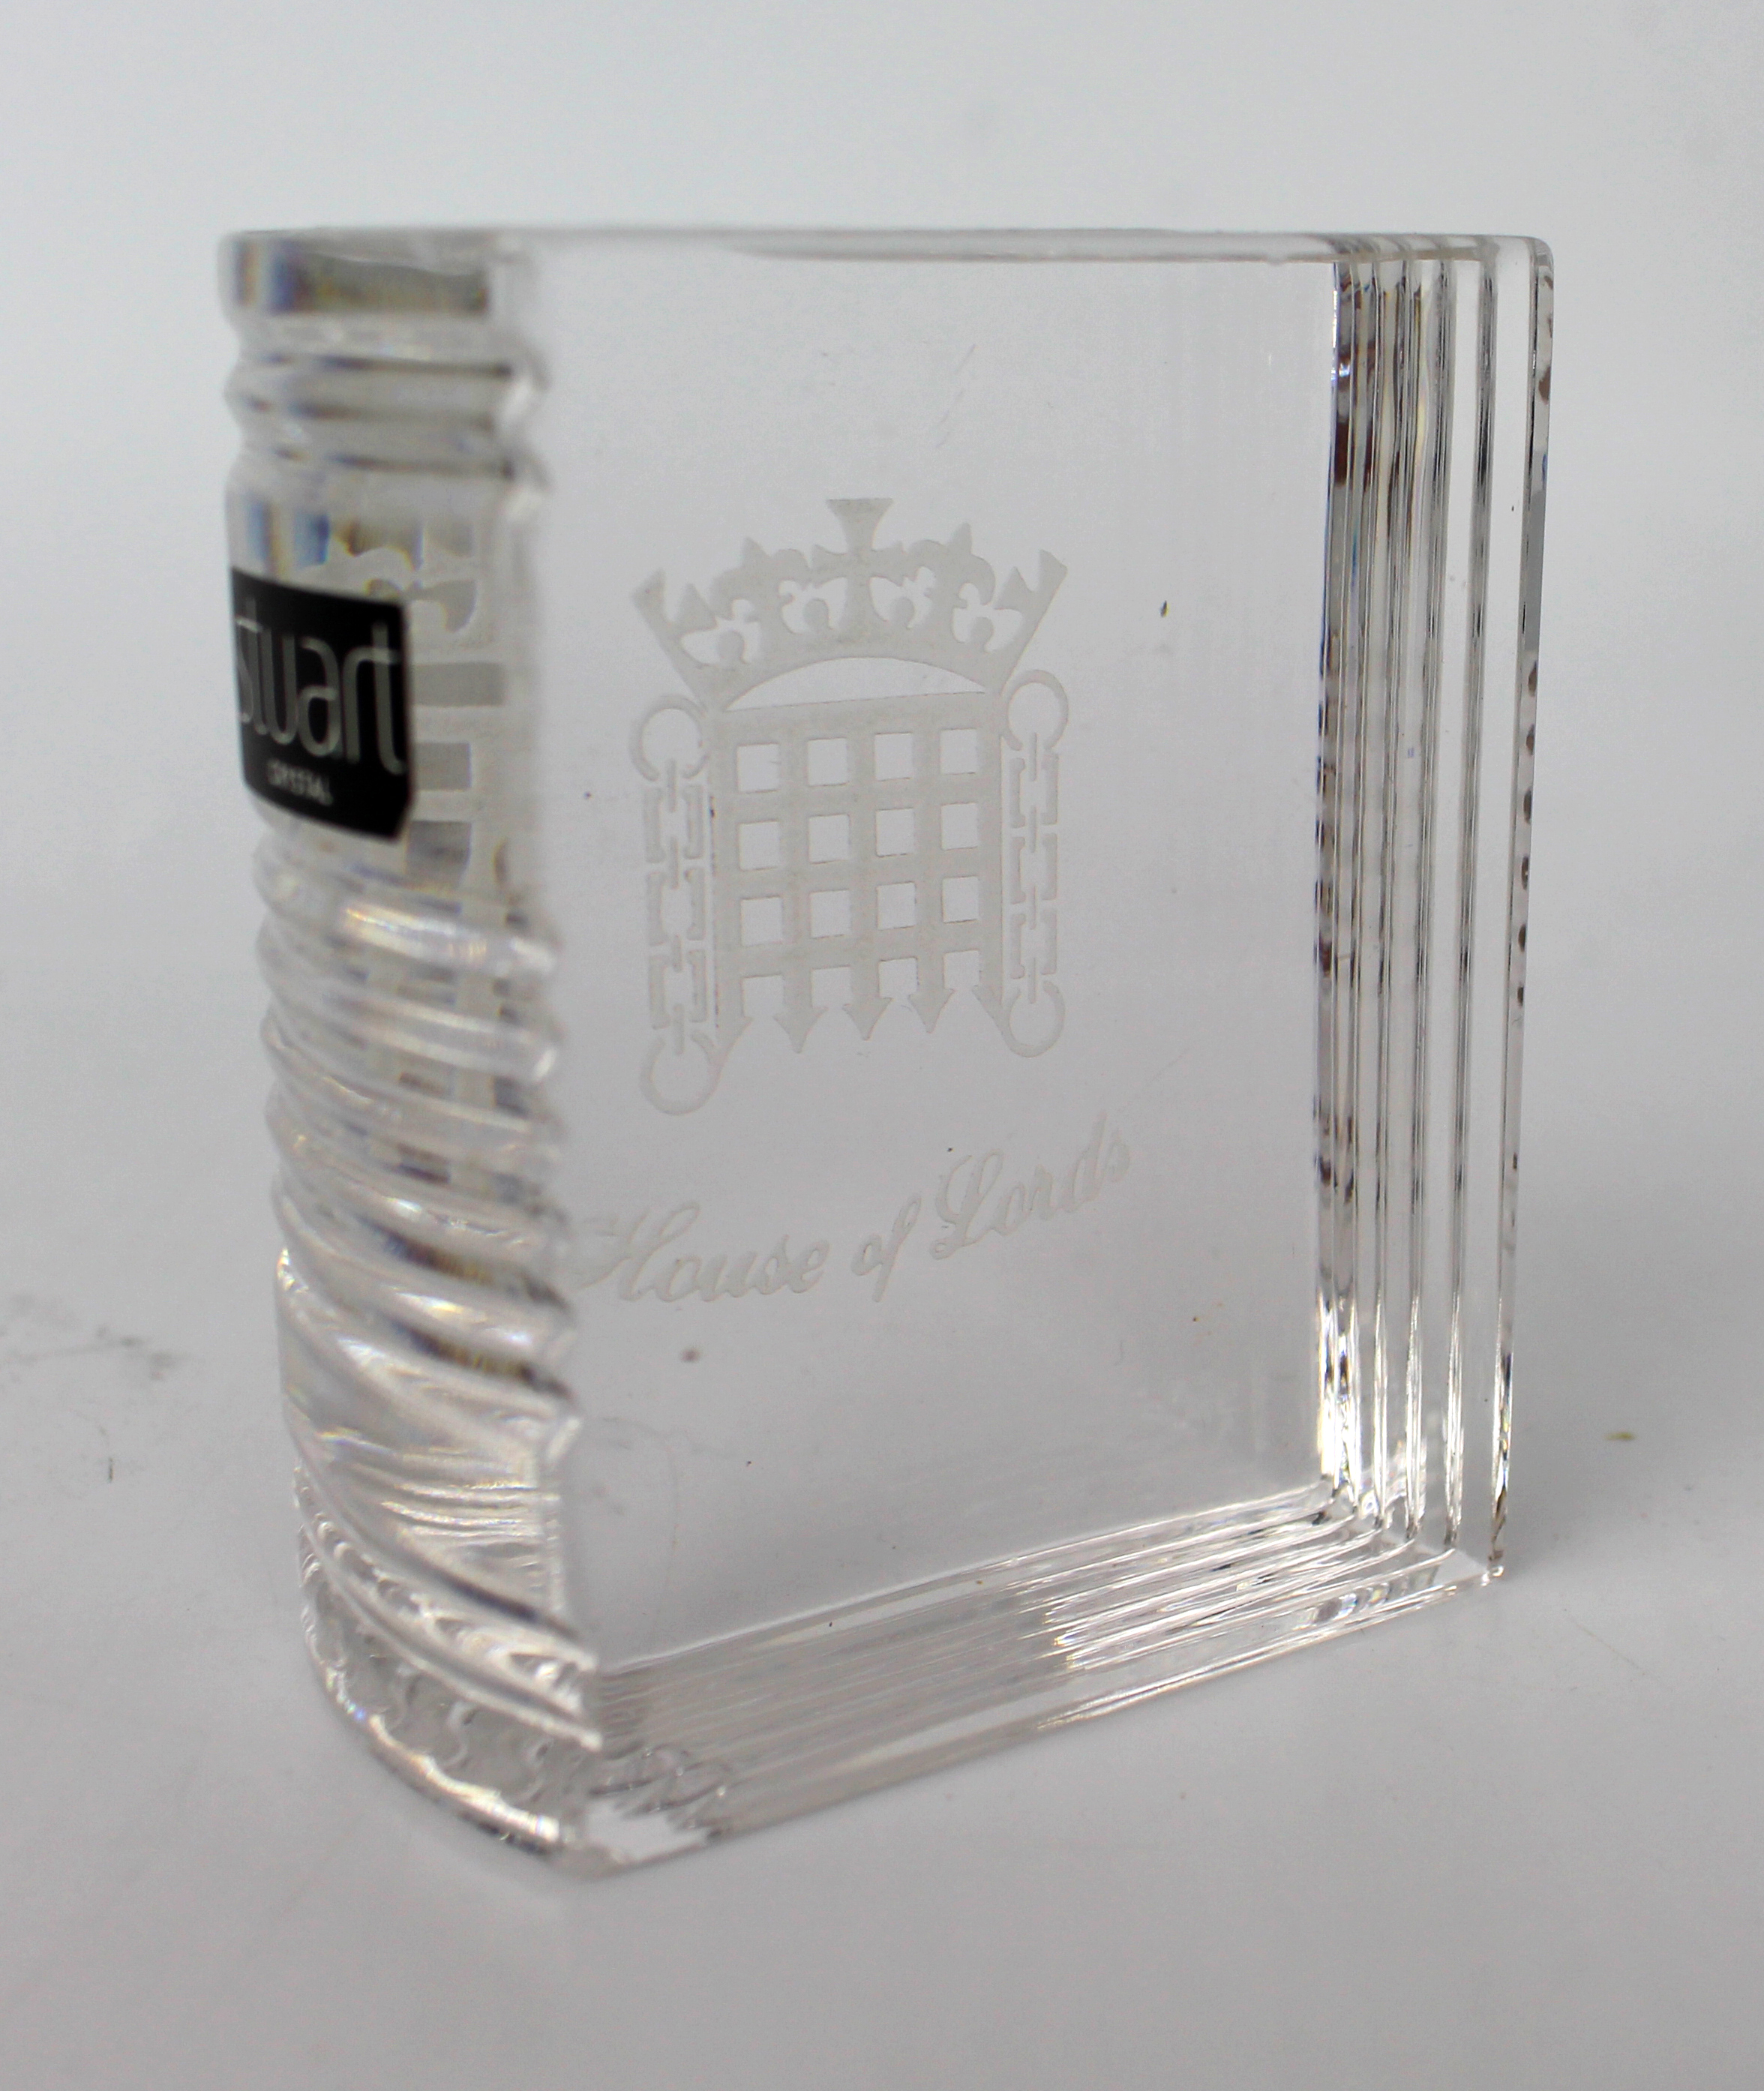 Stuart Crystal House of Lords Paperweight - Image 2 of 3